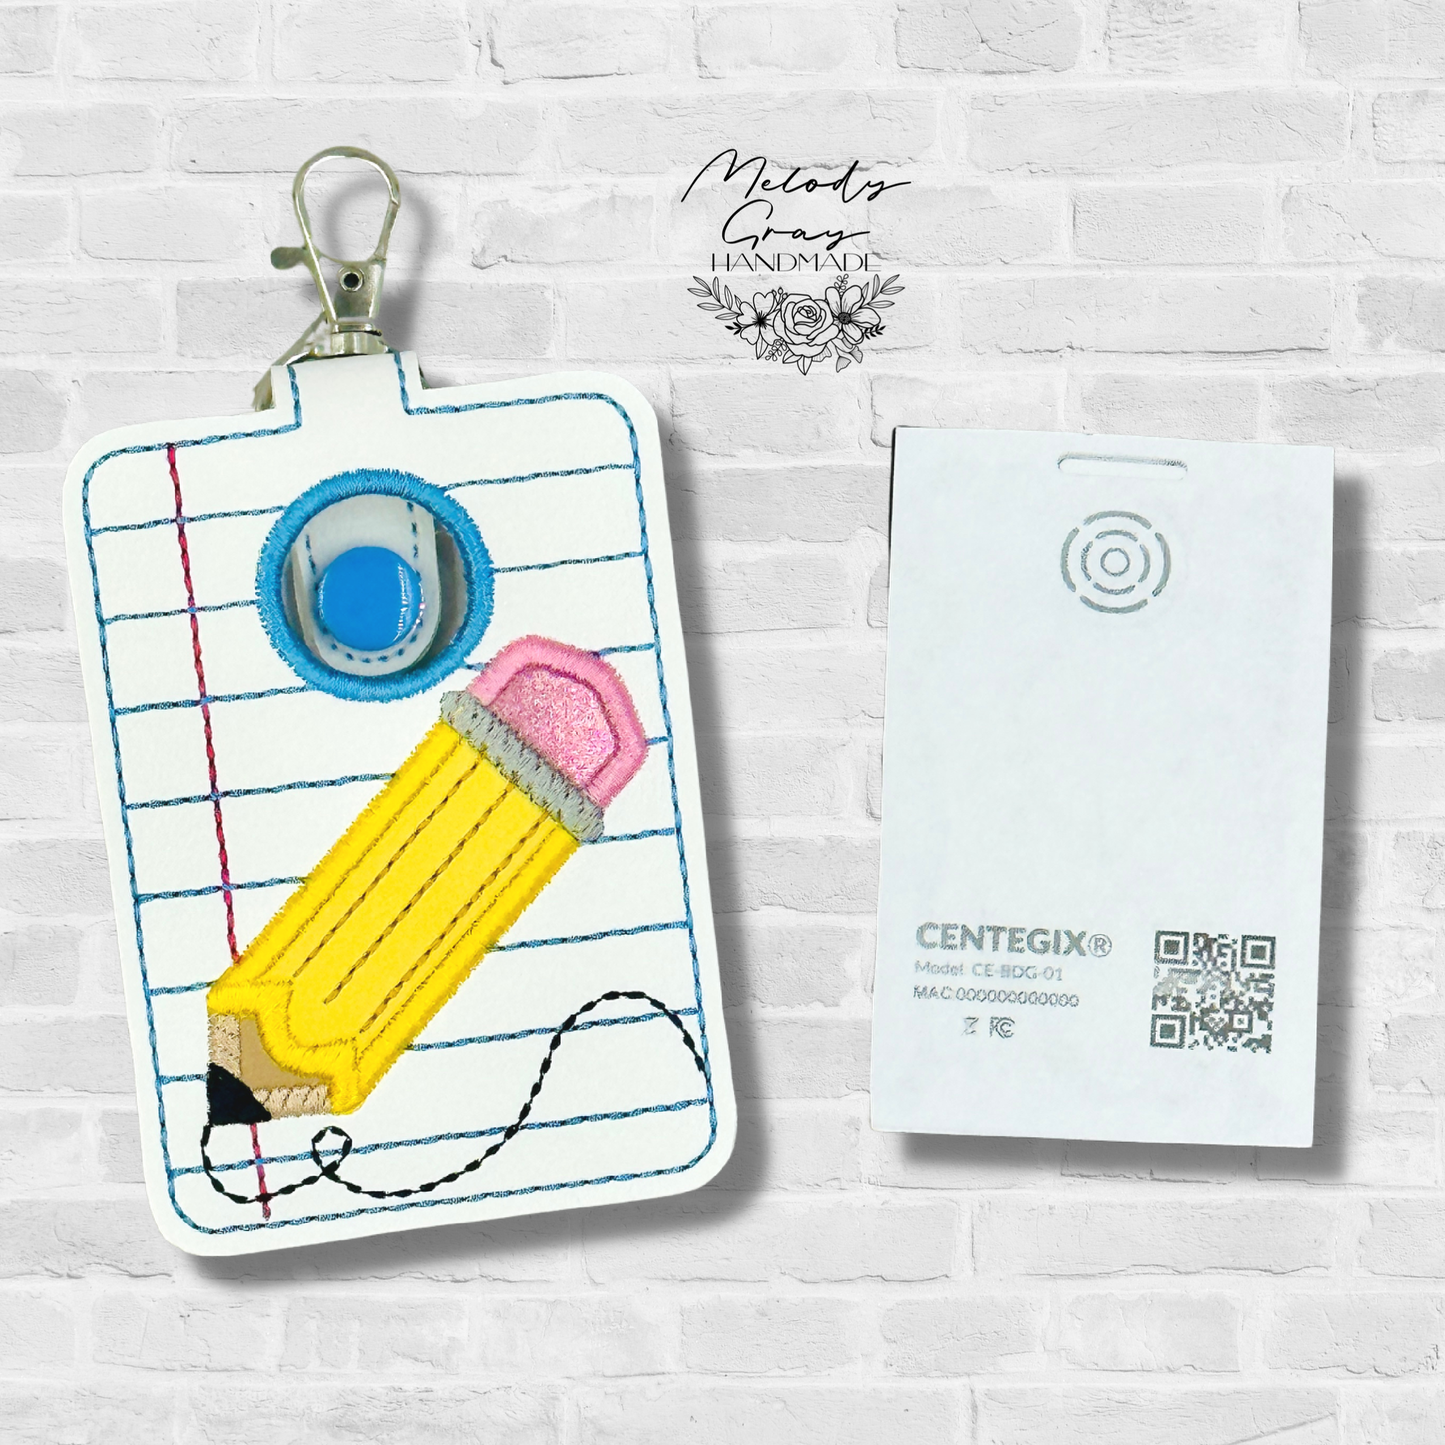 Pencil and Paper Alarm Badge Holder